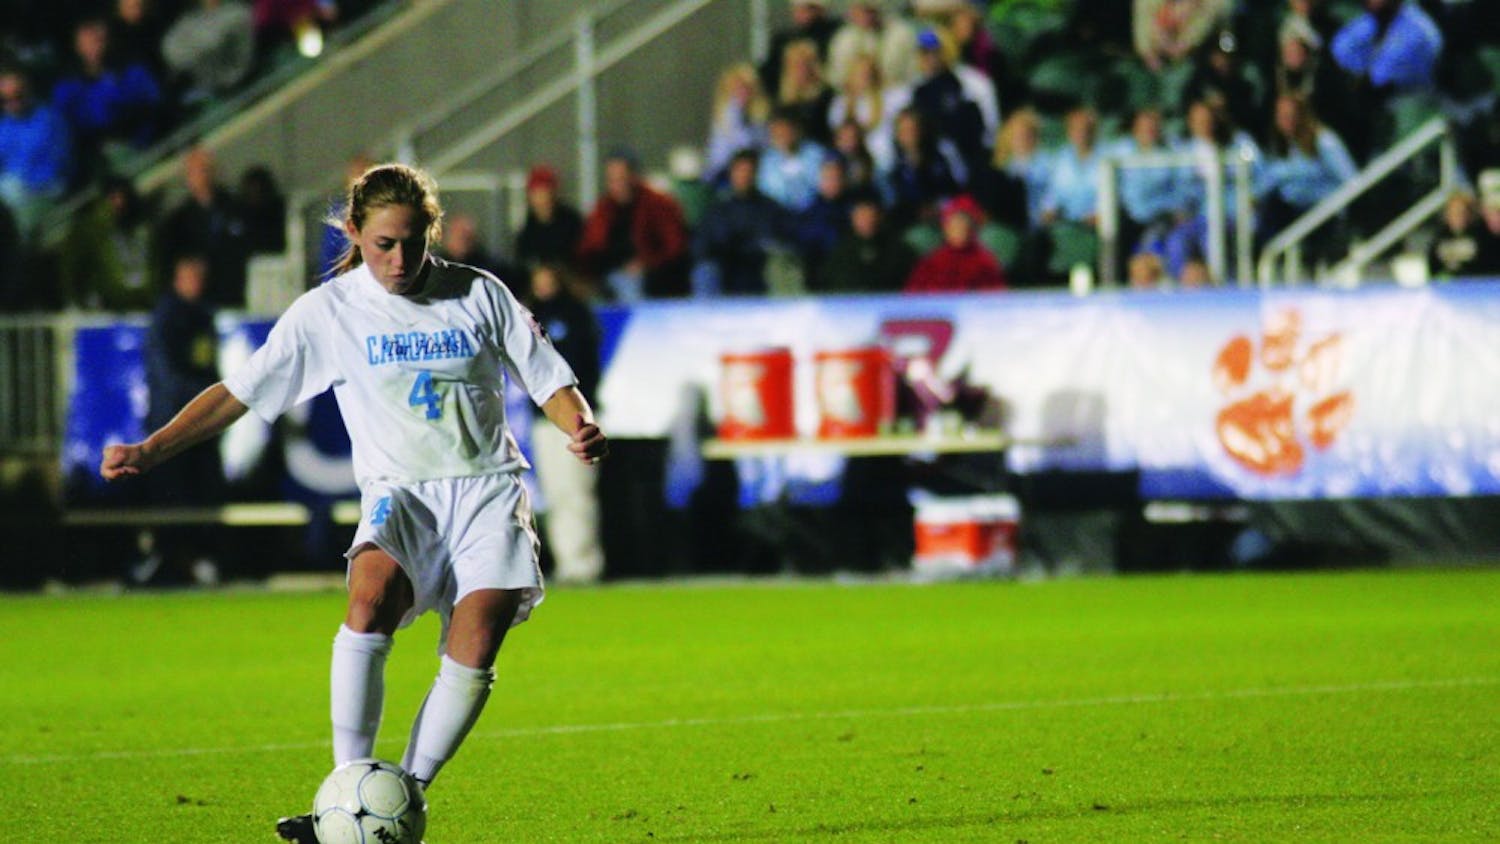 Meghan Klingenberg lines up a penalty kick that ultimately hit the post in UNC’s 5-4 shoot-out loss to Wake Forest in the ACC Tournament semifinals. Klingenberg had the equalizing goal for the Tar Heels with less than three minutes left. It is the first time in the history of the tournament that UNC has not reached the final.